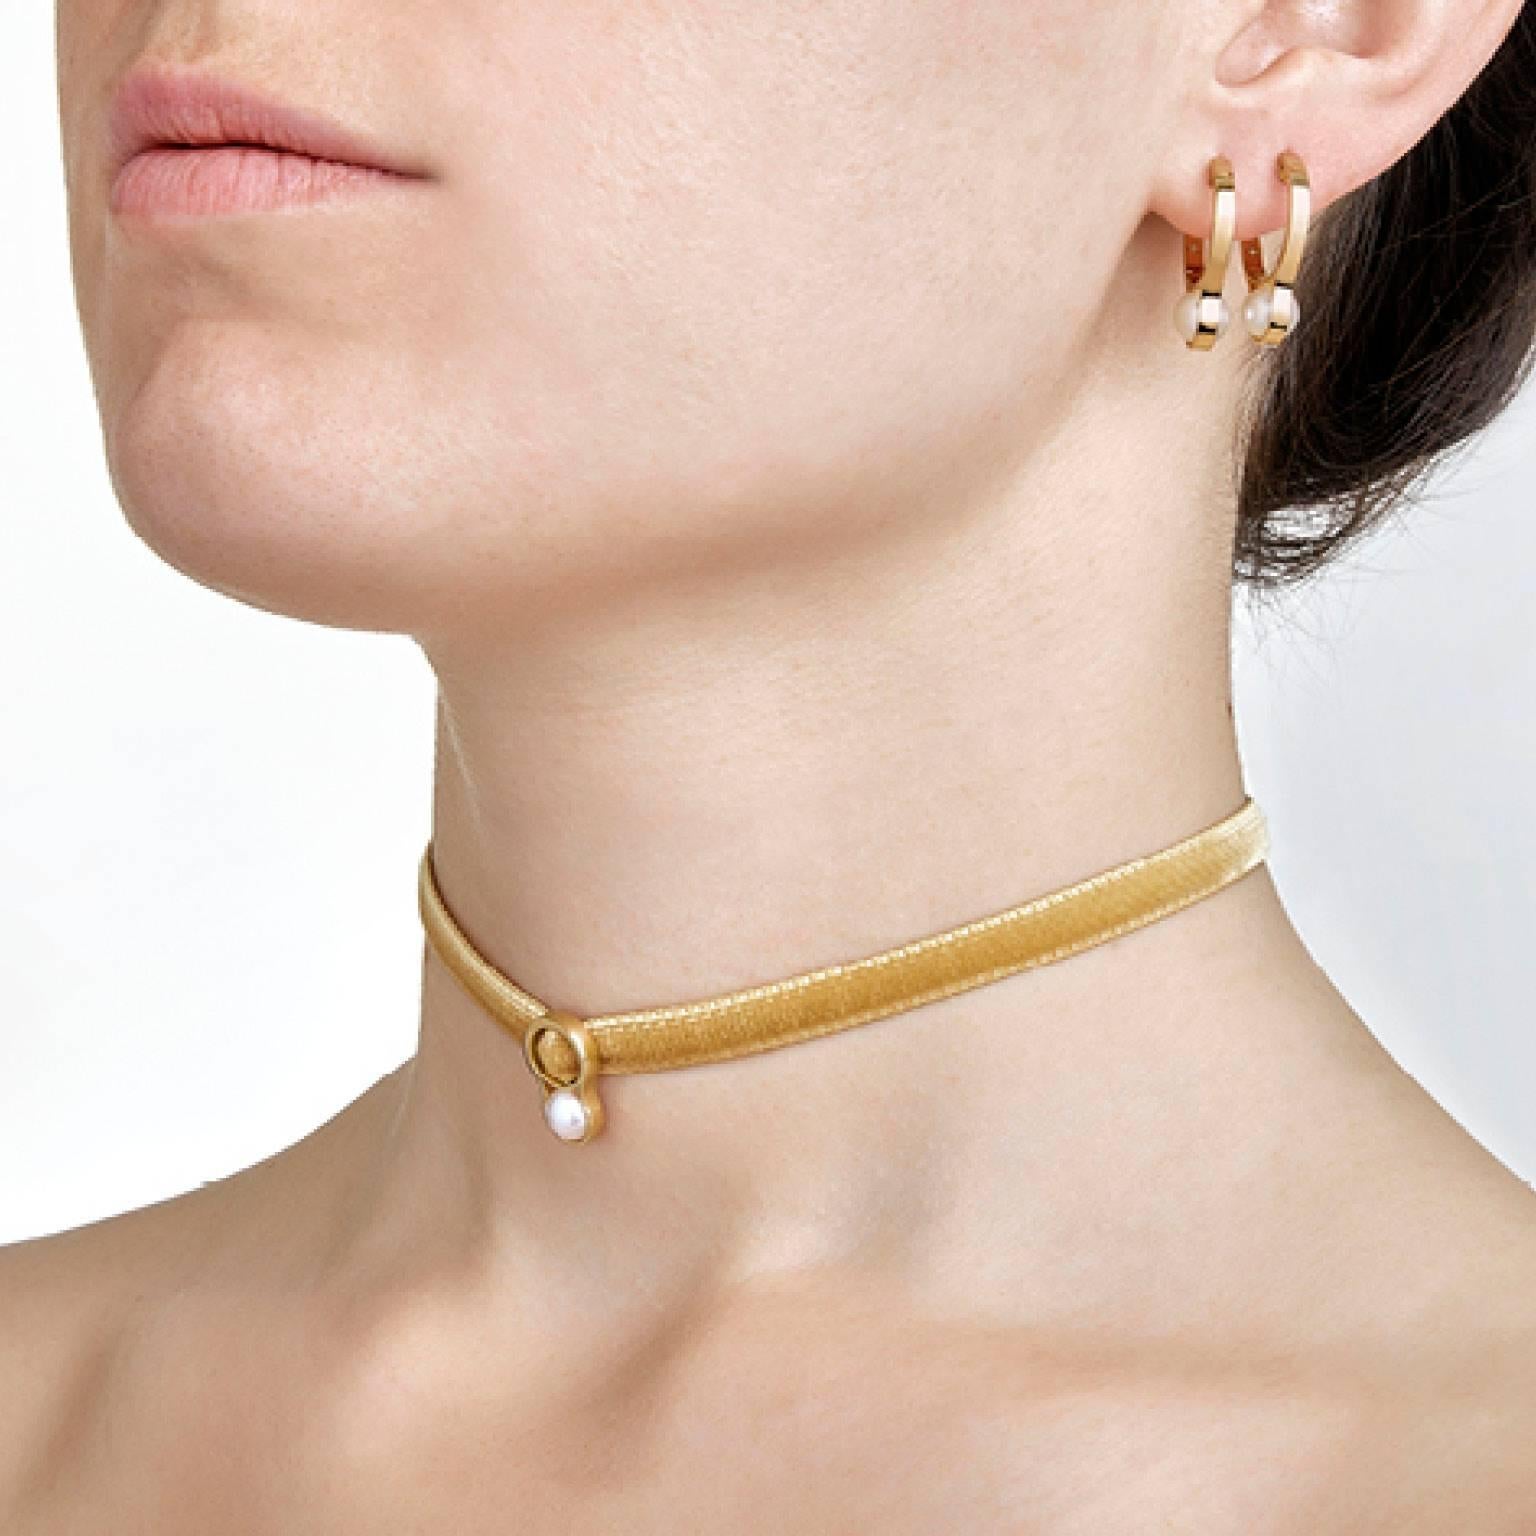 Realized by hand in Nathalie Jean's atelier, Nakkar Choker pays homage to the pearl, a symbol of divinity, royalty and luxury that has fascinated and inspired since the dawn of time. A simple 18 karat gold band encircles the precious sphere and